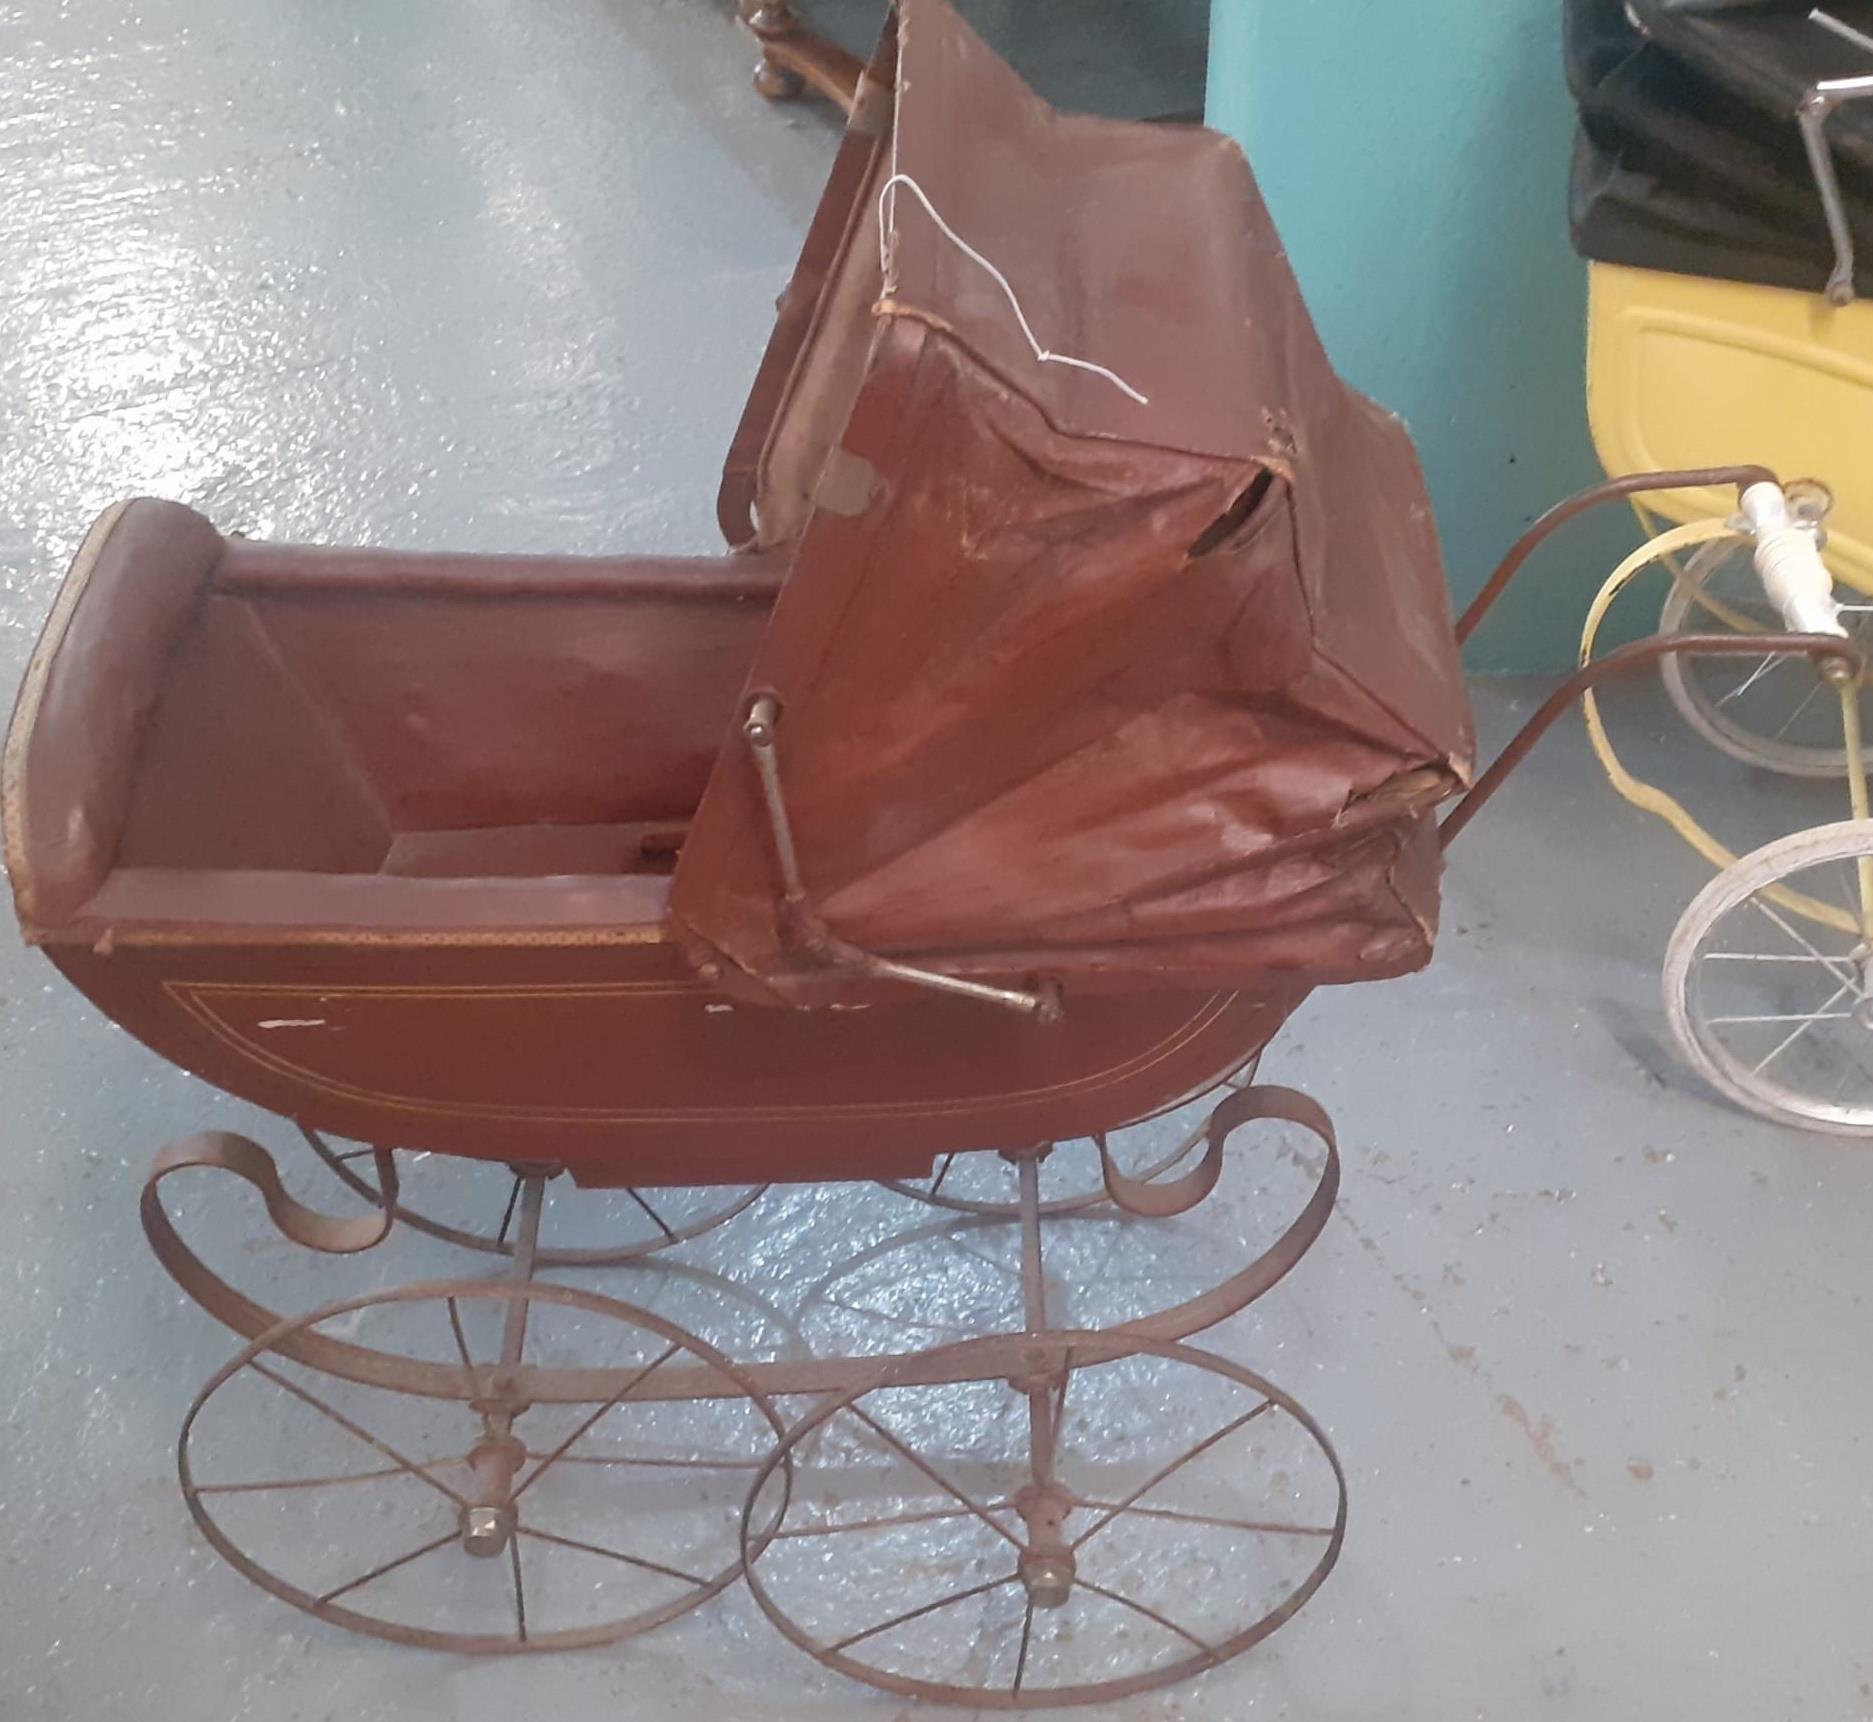 Late Victorian/Edwardian doll's pram with folding canvas canopy, ceramic handle and sprung frame